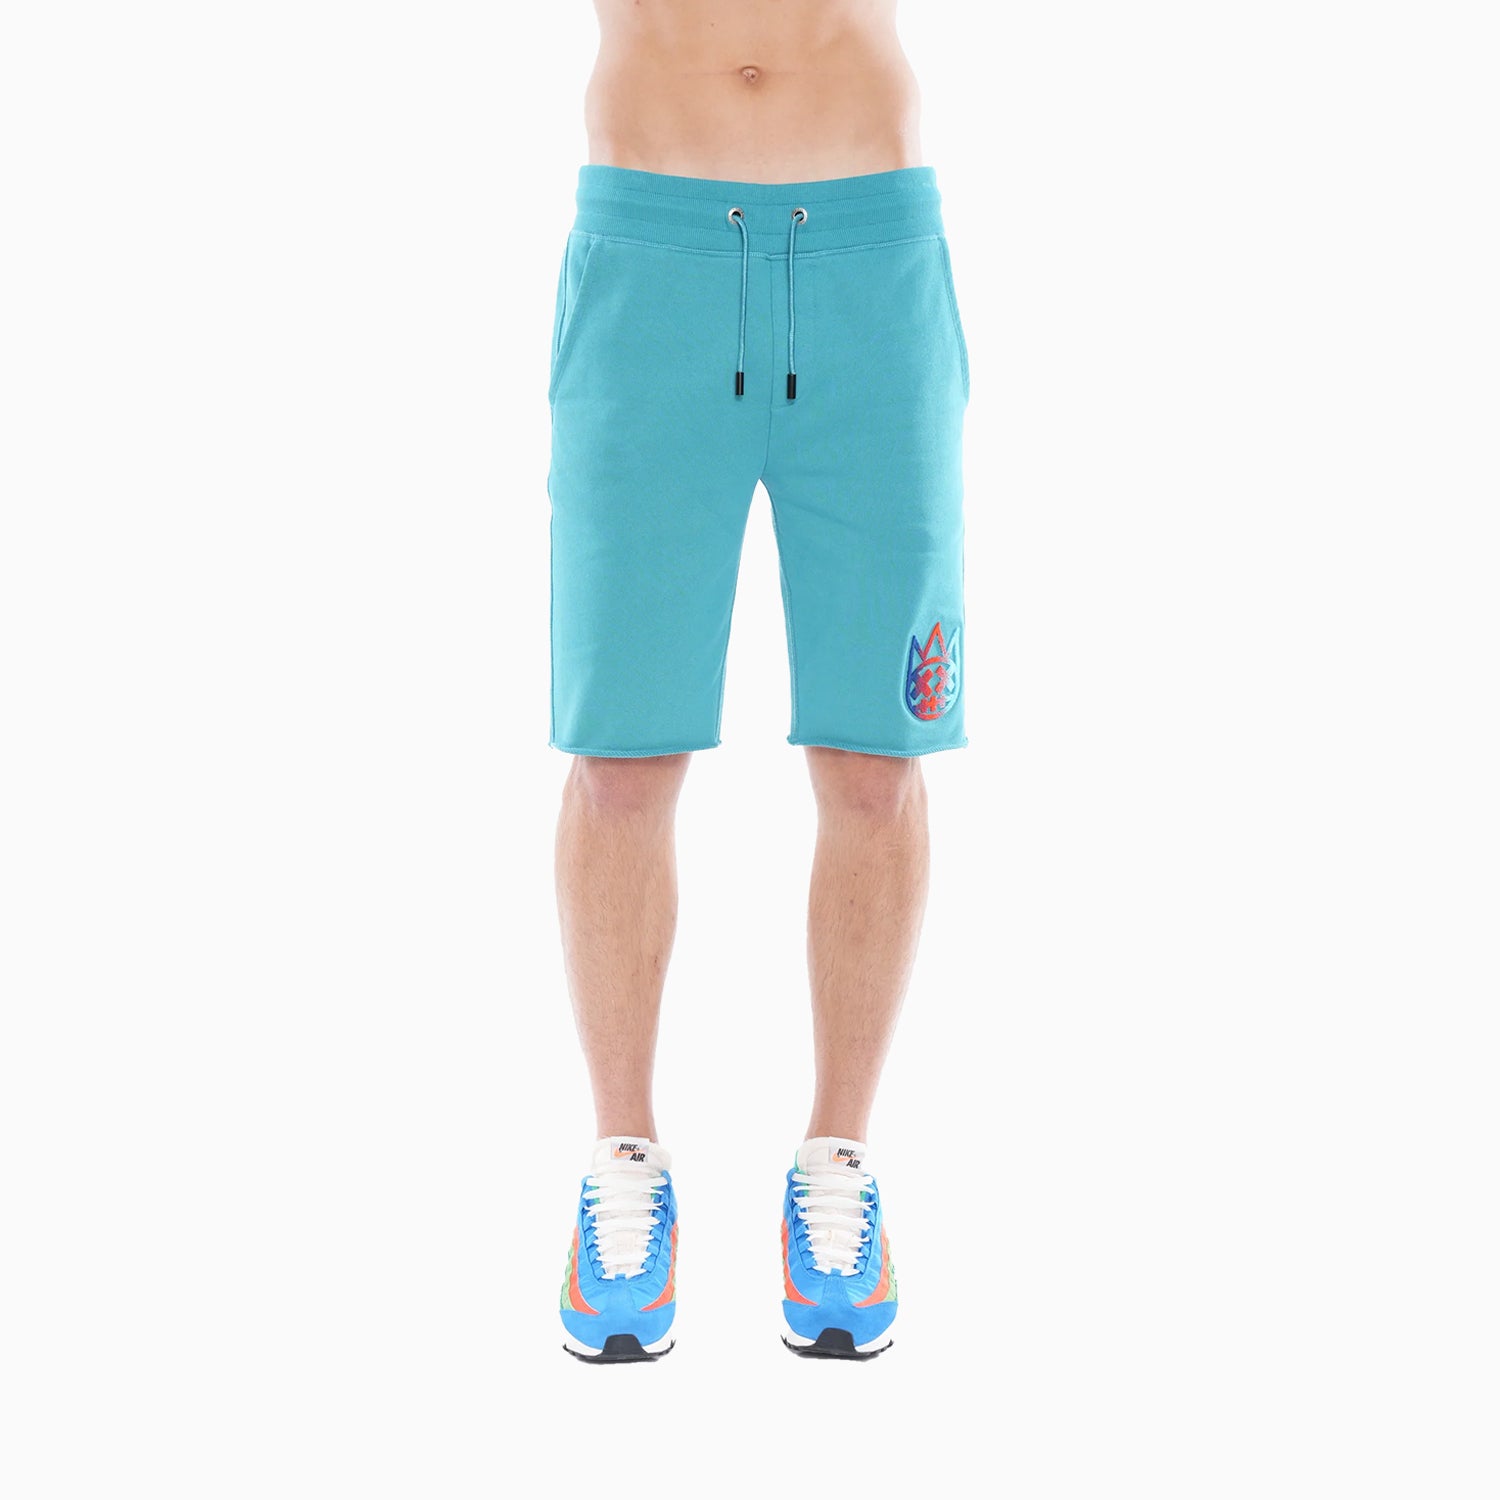 cult-of-individuality-mens-sweatshorts-in-tile-blue-623ac-sh25c